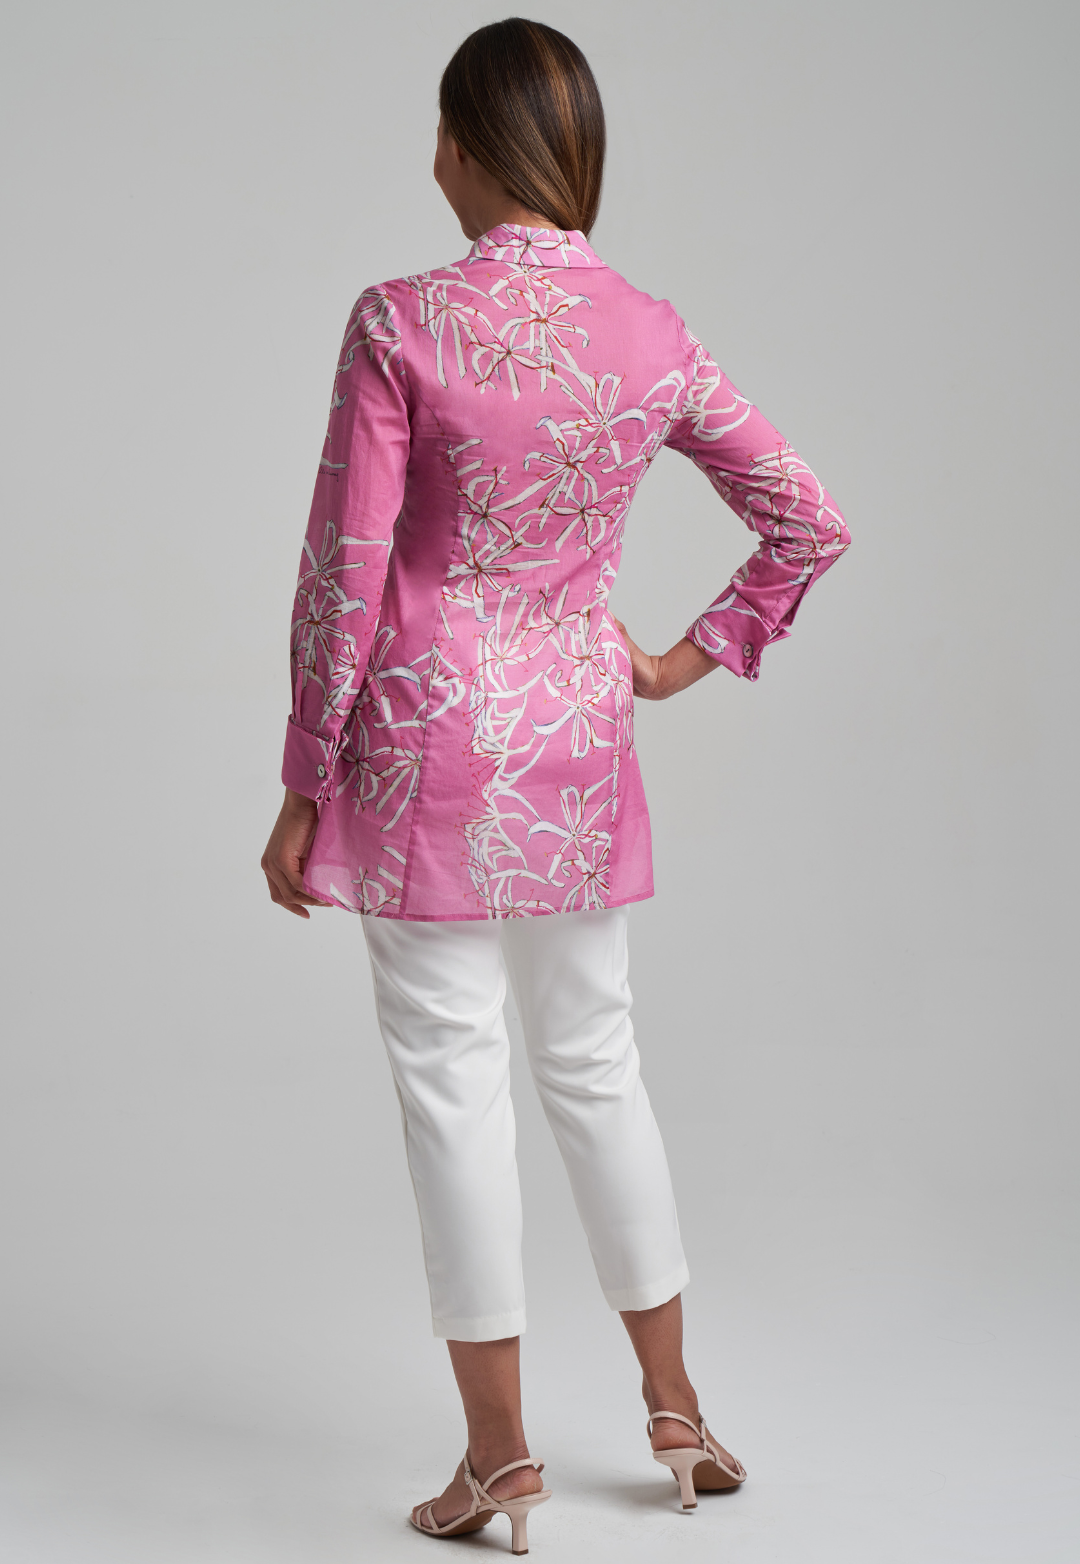 Woman wearing cotton shirt blouse in pink watermelon spider lily print by Ala von Auersperg for spring summer 2021